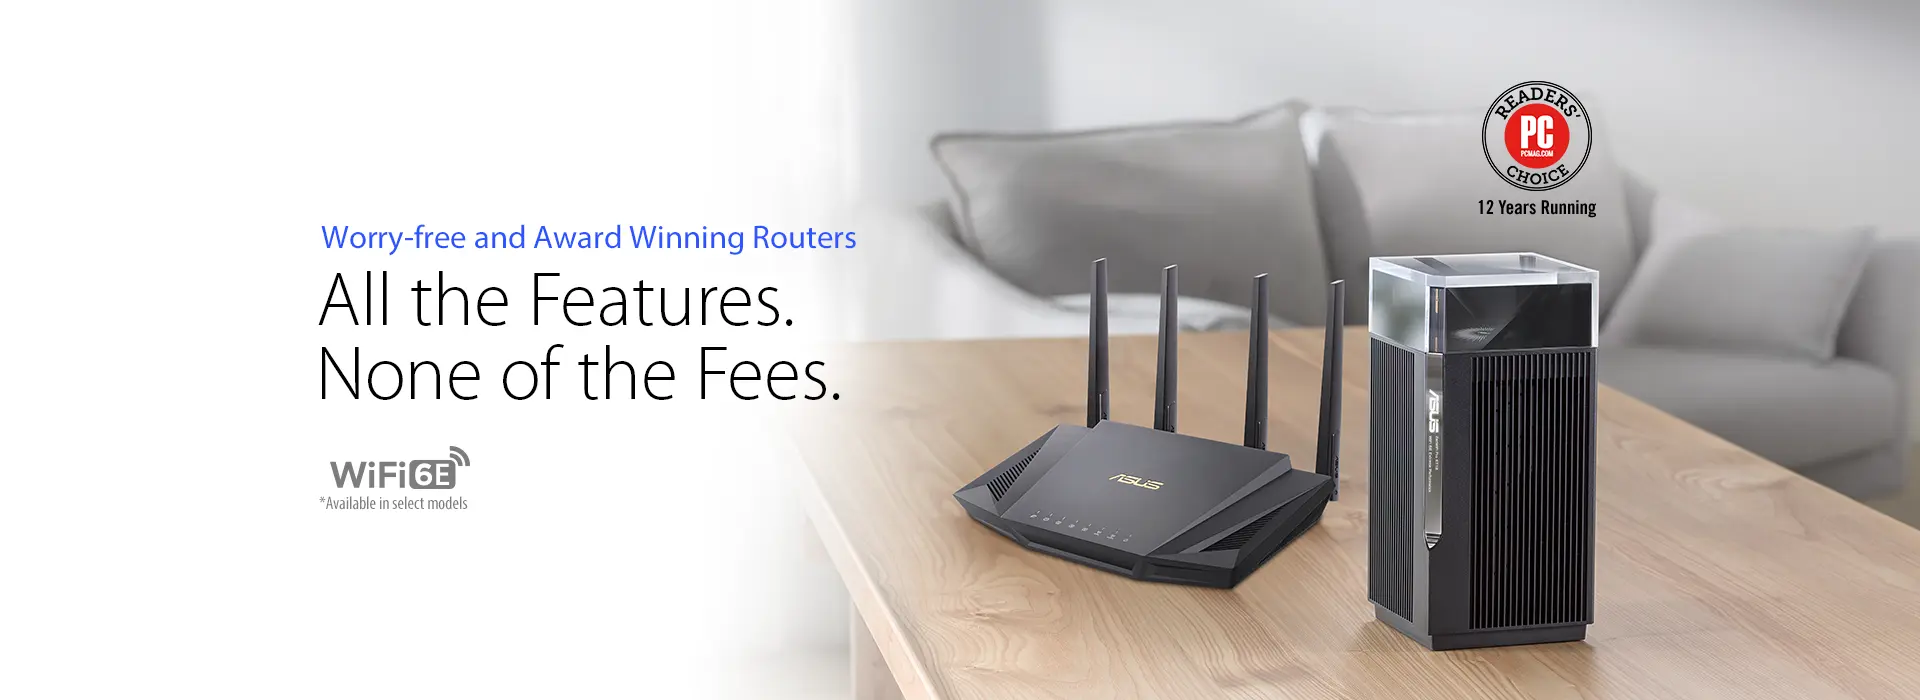 ASUS Router - All the features. None of the Fees.